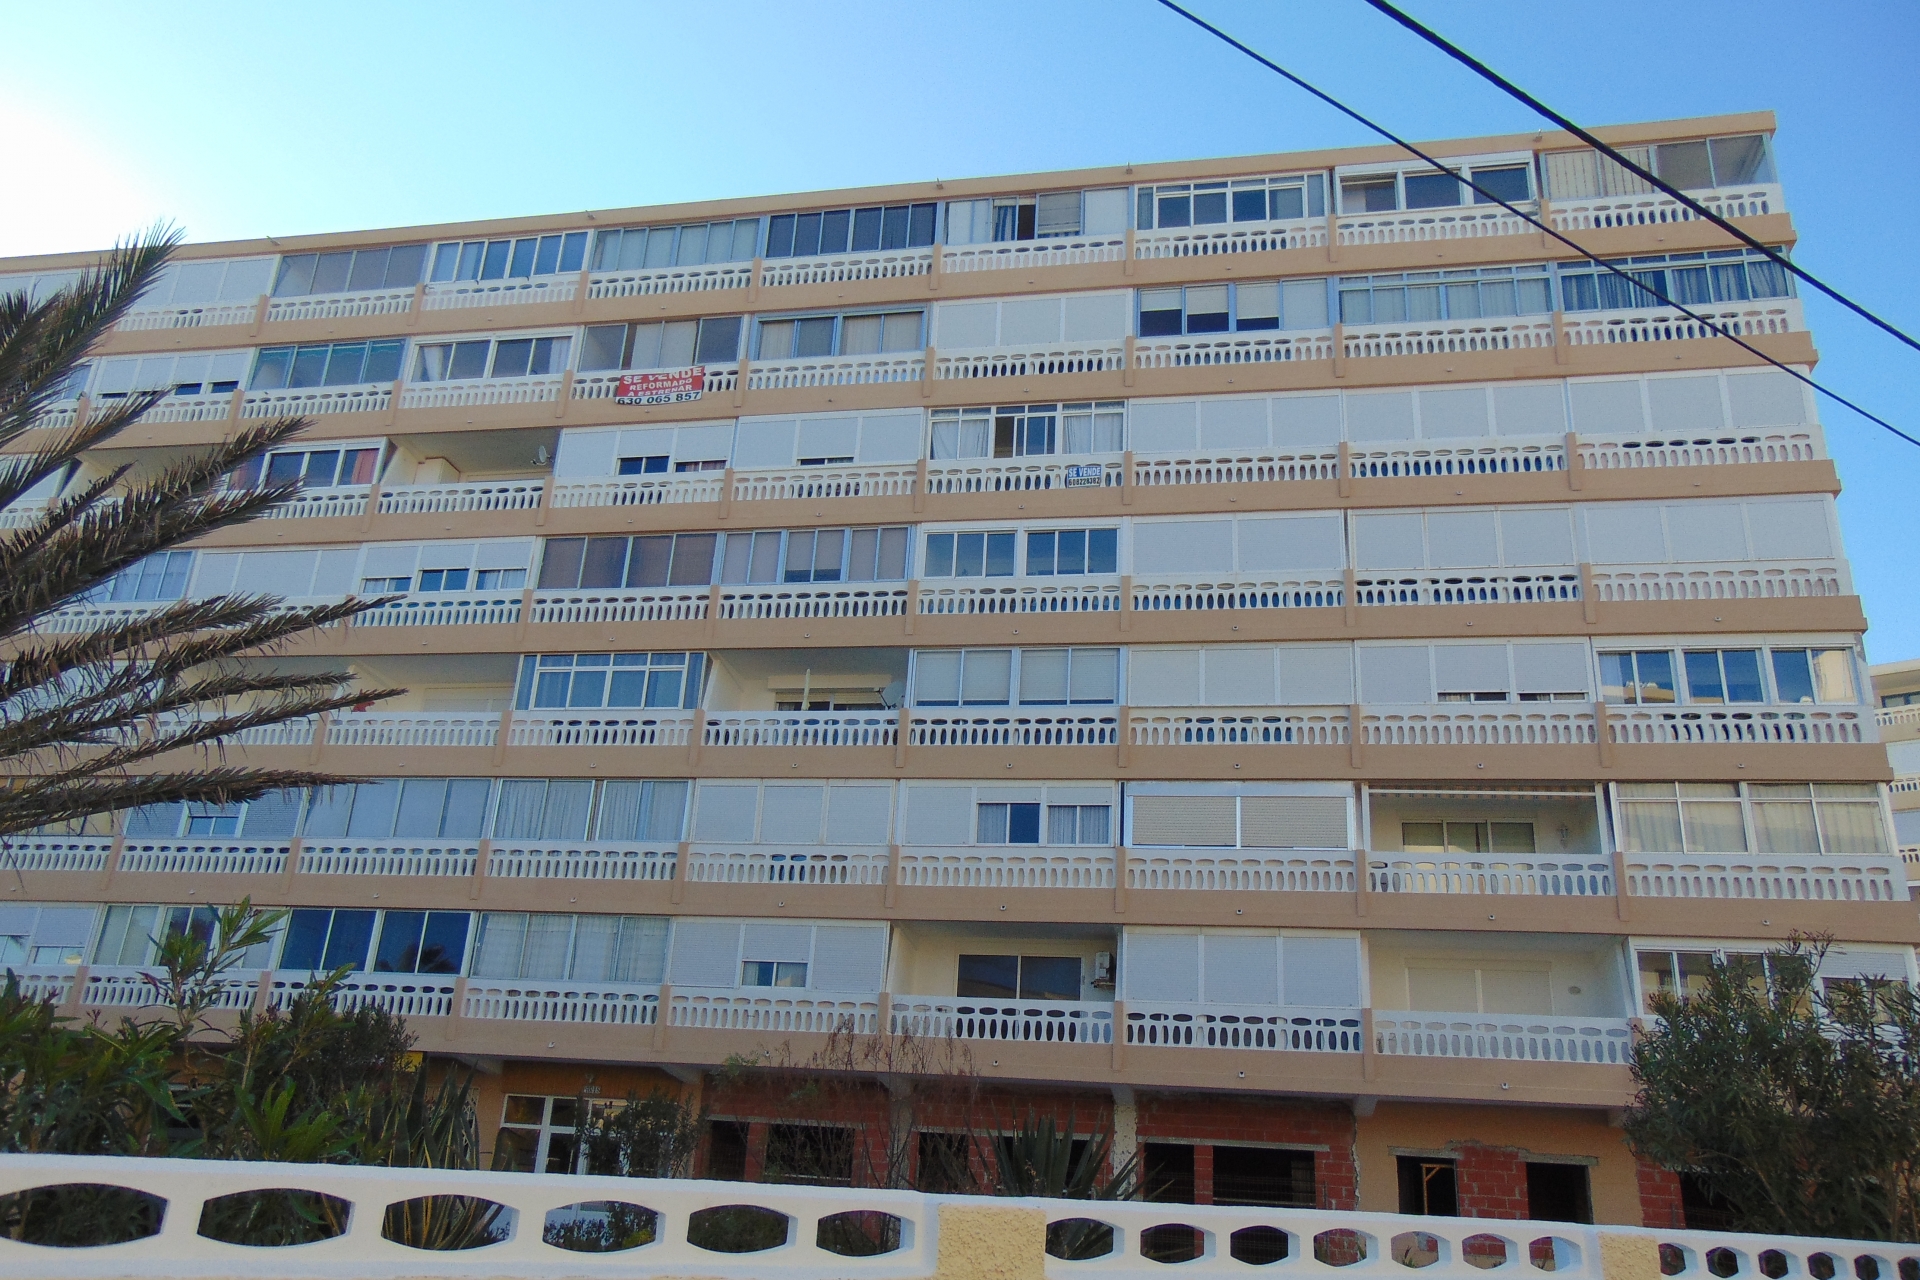 Property on Hold - Apartment for sale - Torrevieja - La Mata